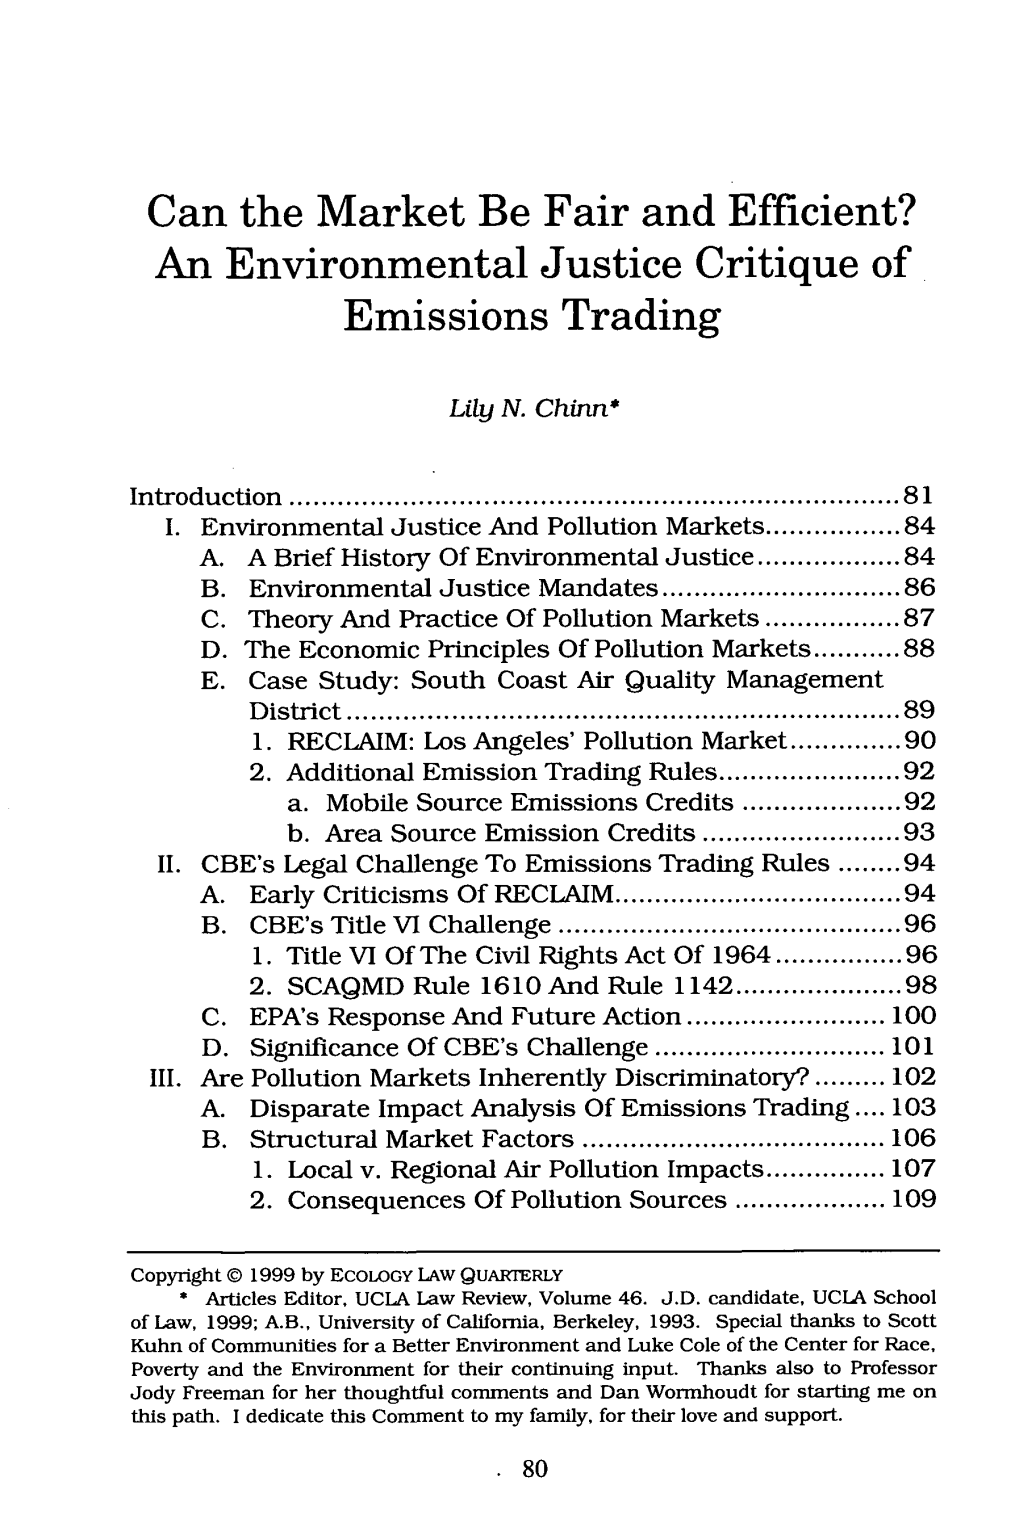 An Environmental Justice Critique of Emissions Trading